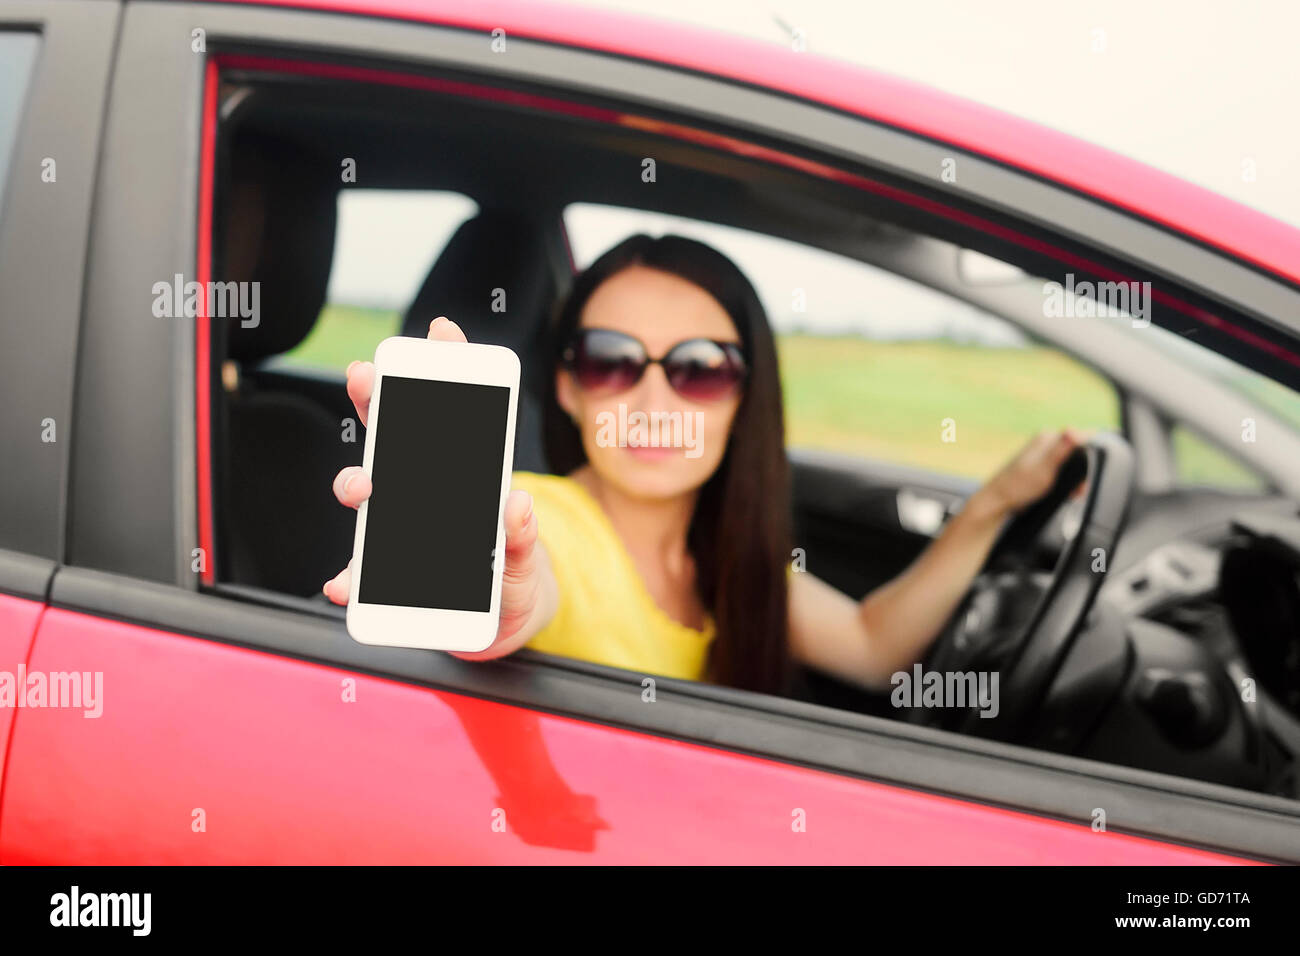 Woman showing her smartphone out the window of a car. Stock Photo